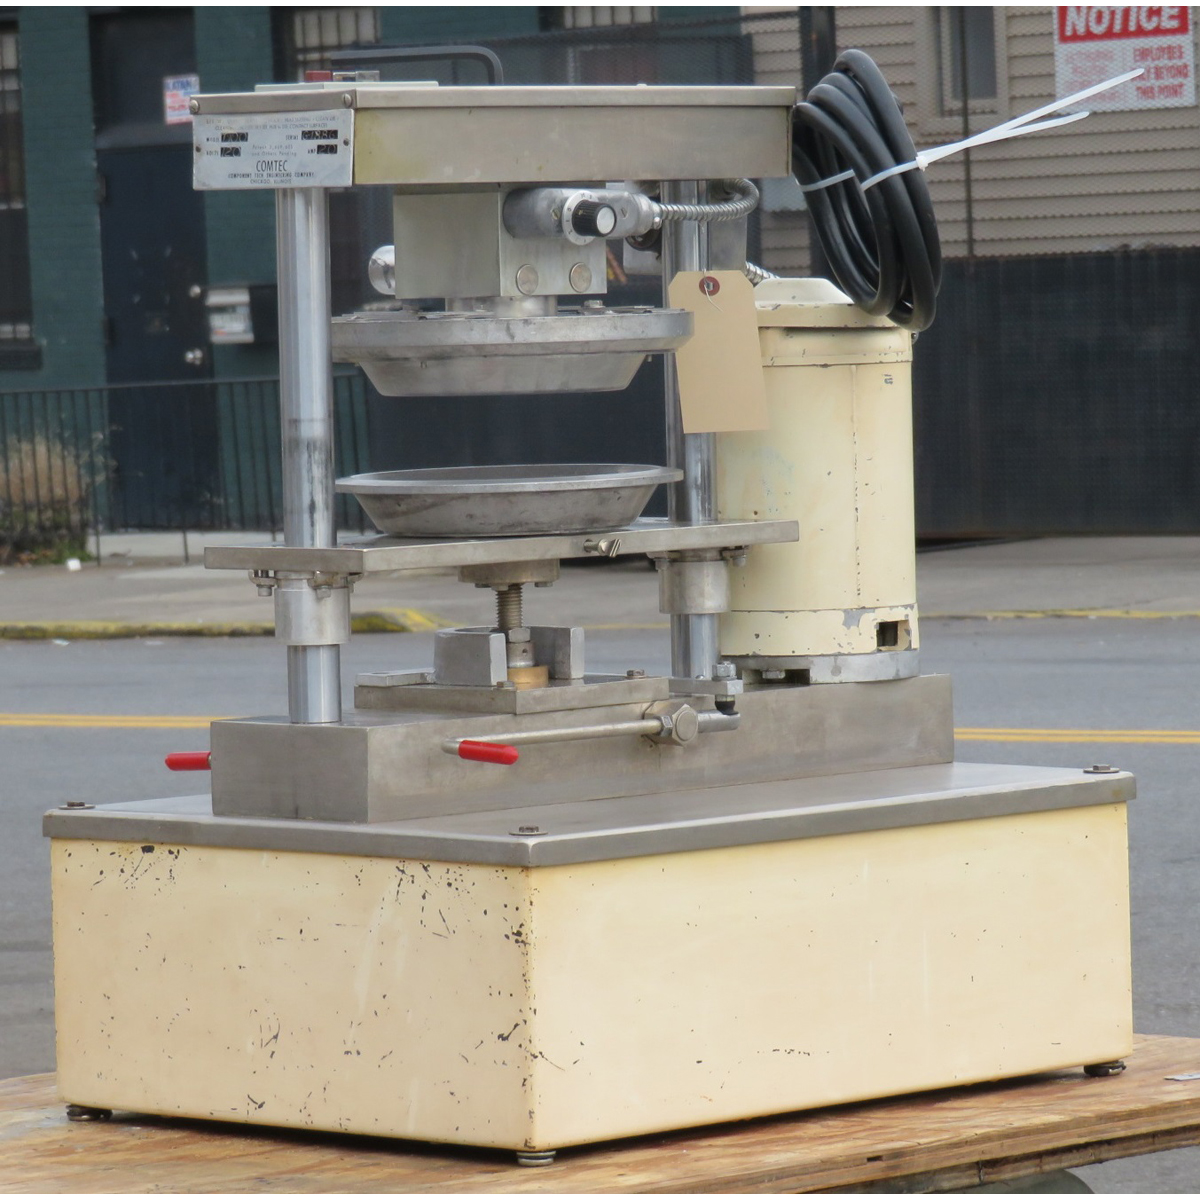 Comtec 1100 7" Pan Pie Crust Forming Press, Used Excellent Condition image 2